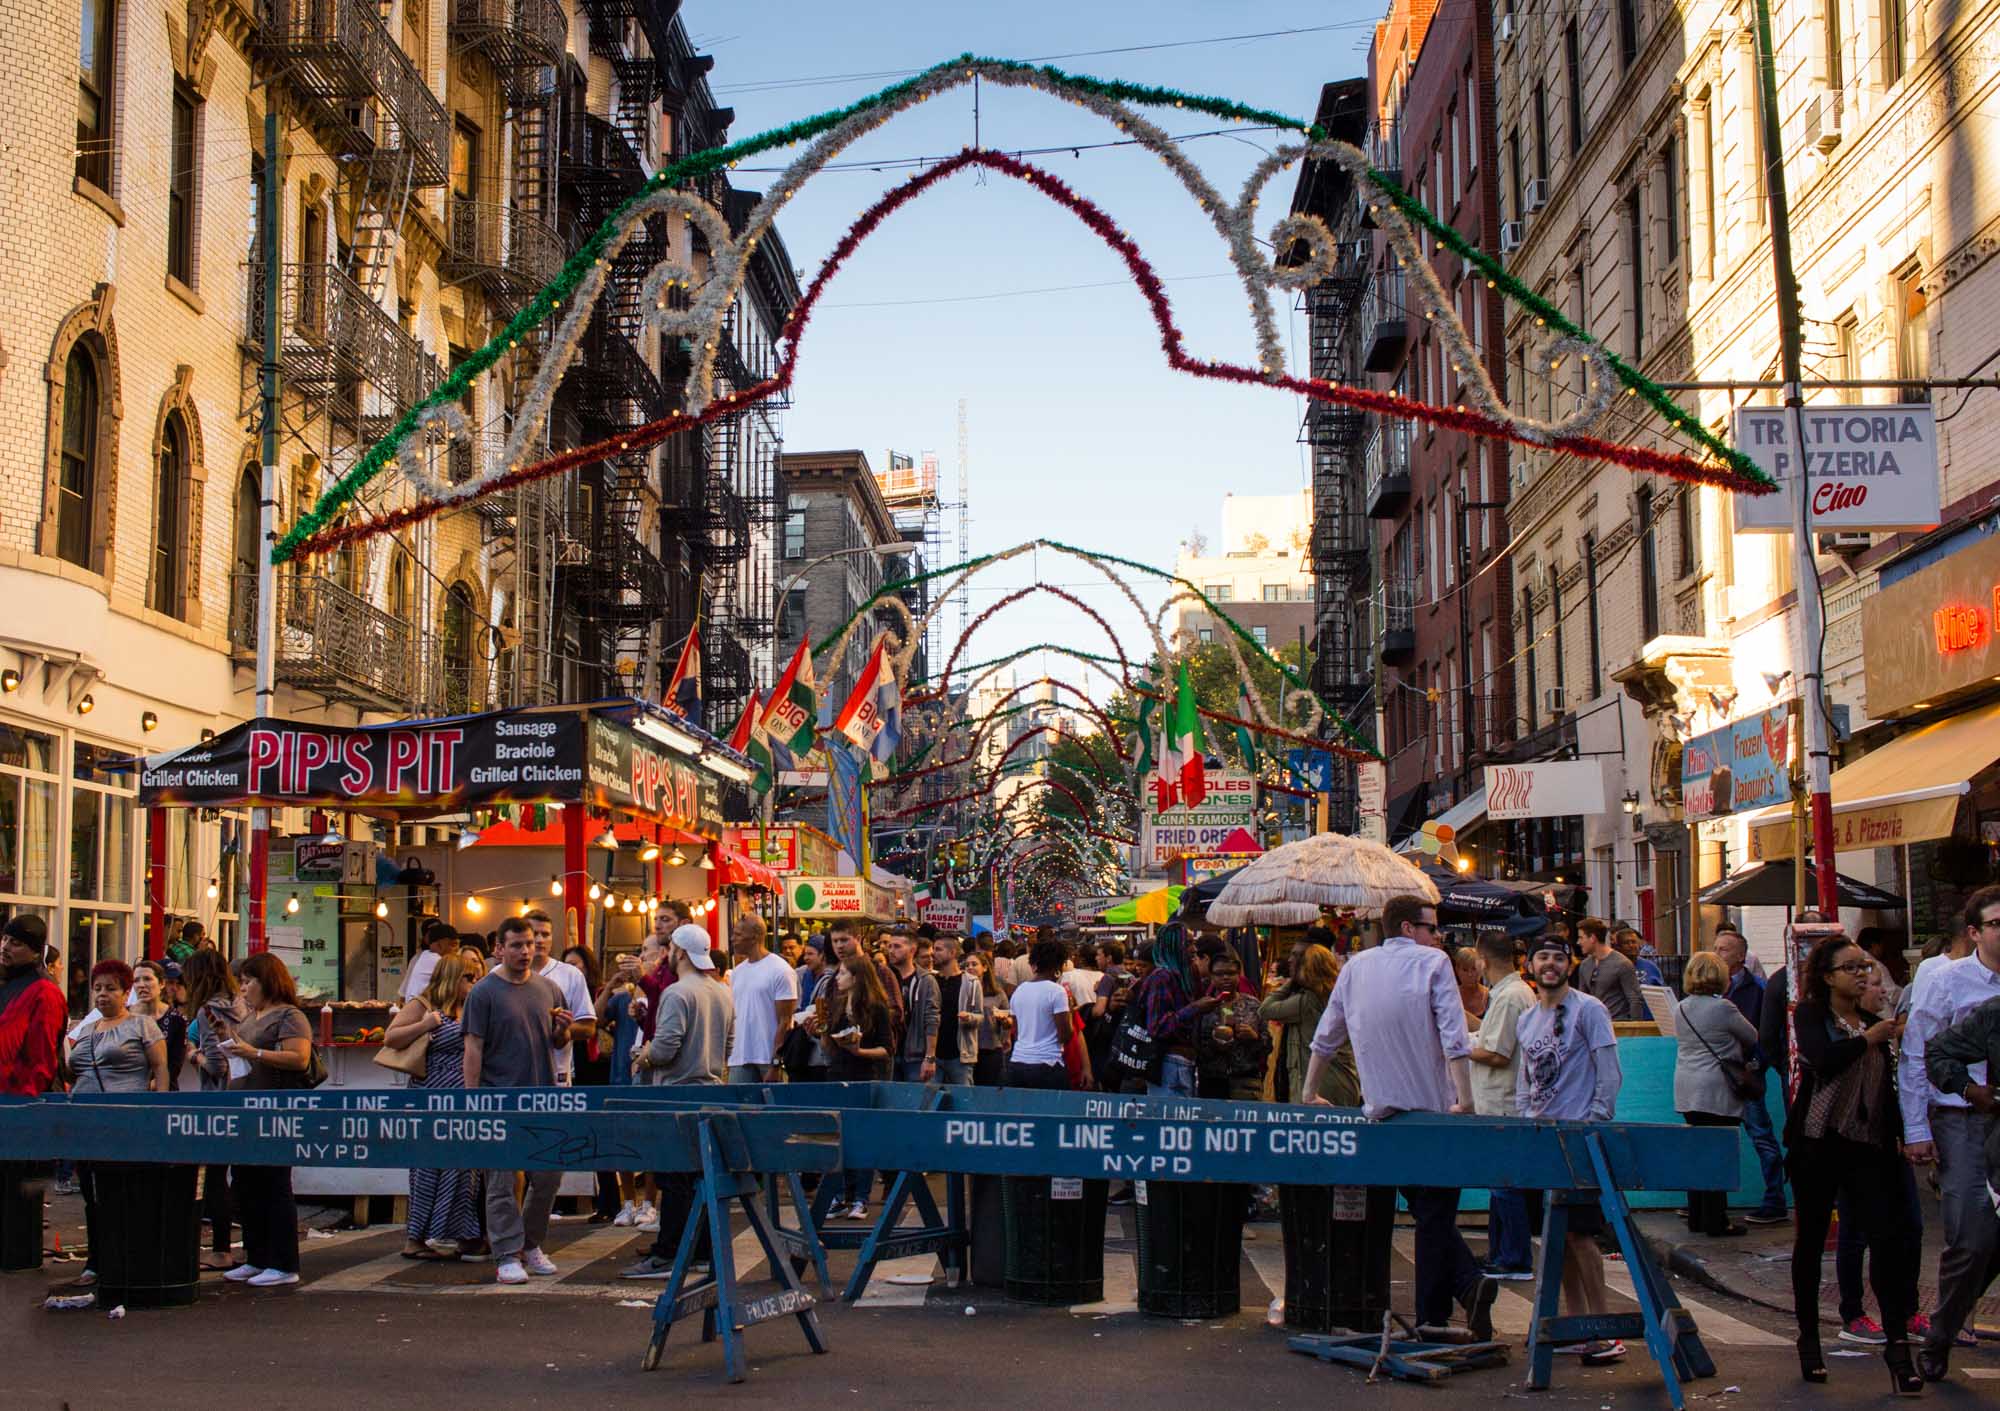 The San Gennaro festival in Little Italy